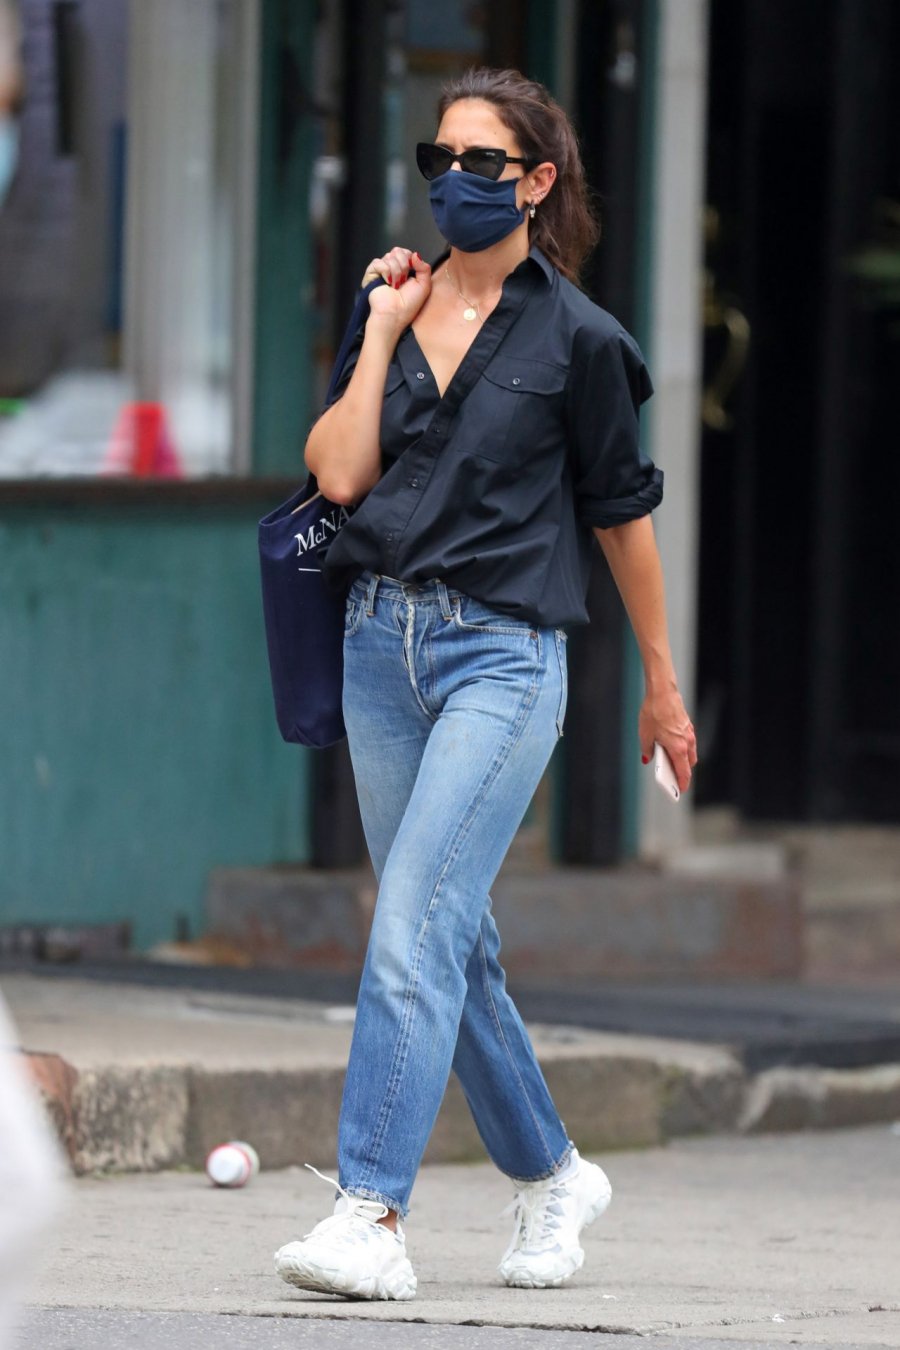 katie-holmes-in-casual-outfit-new-york-08-28-2020-9-16302204795991614249104